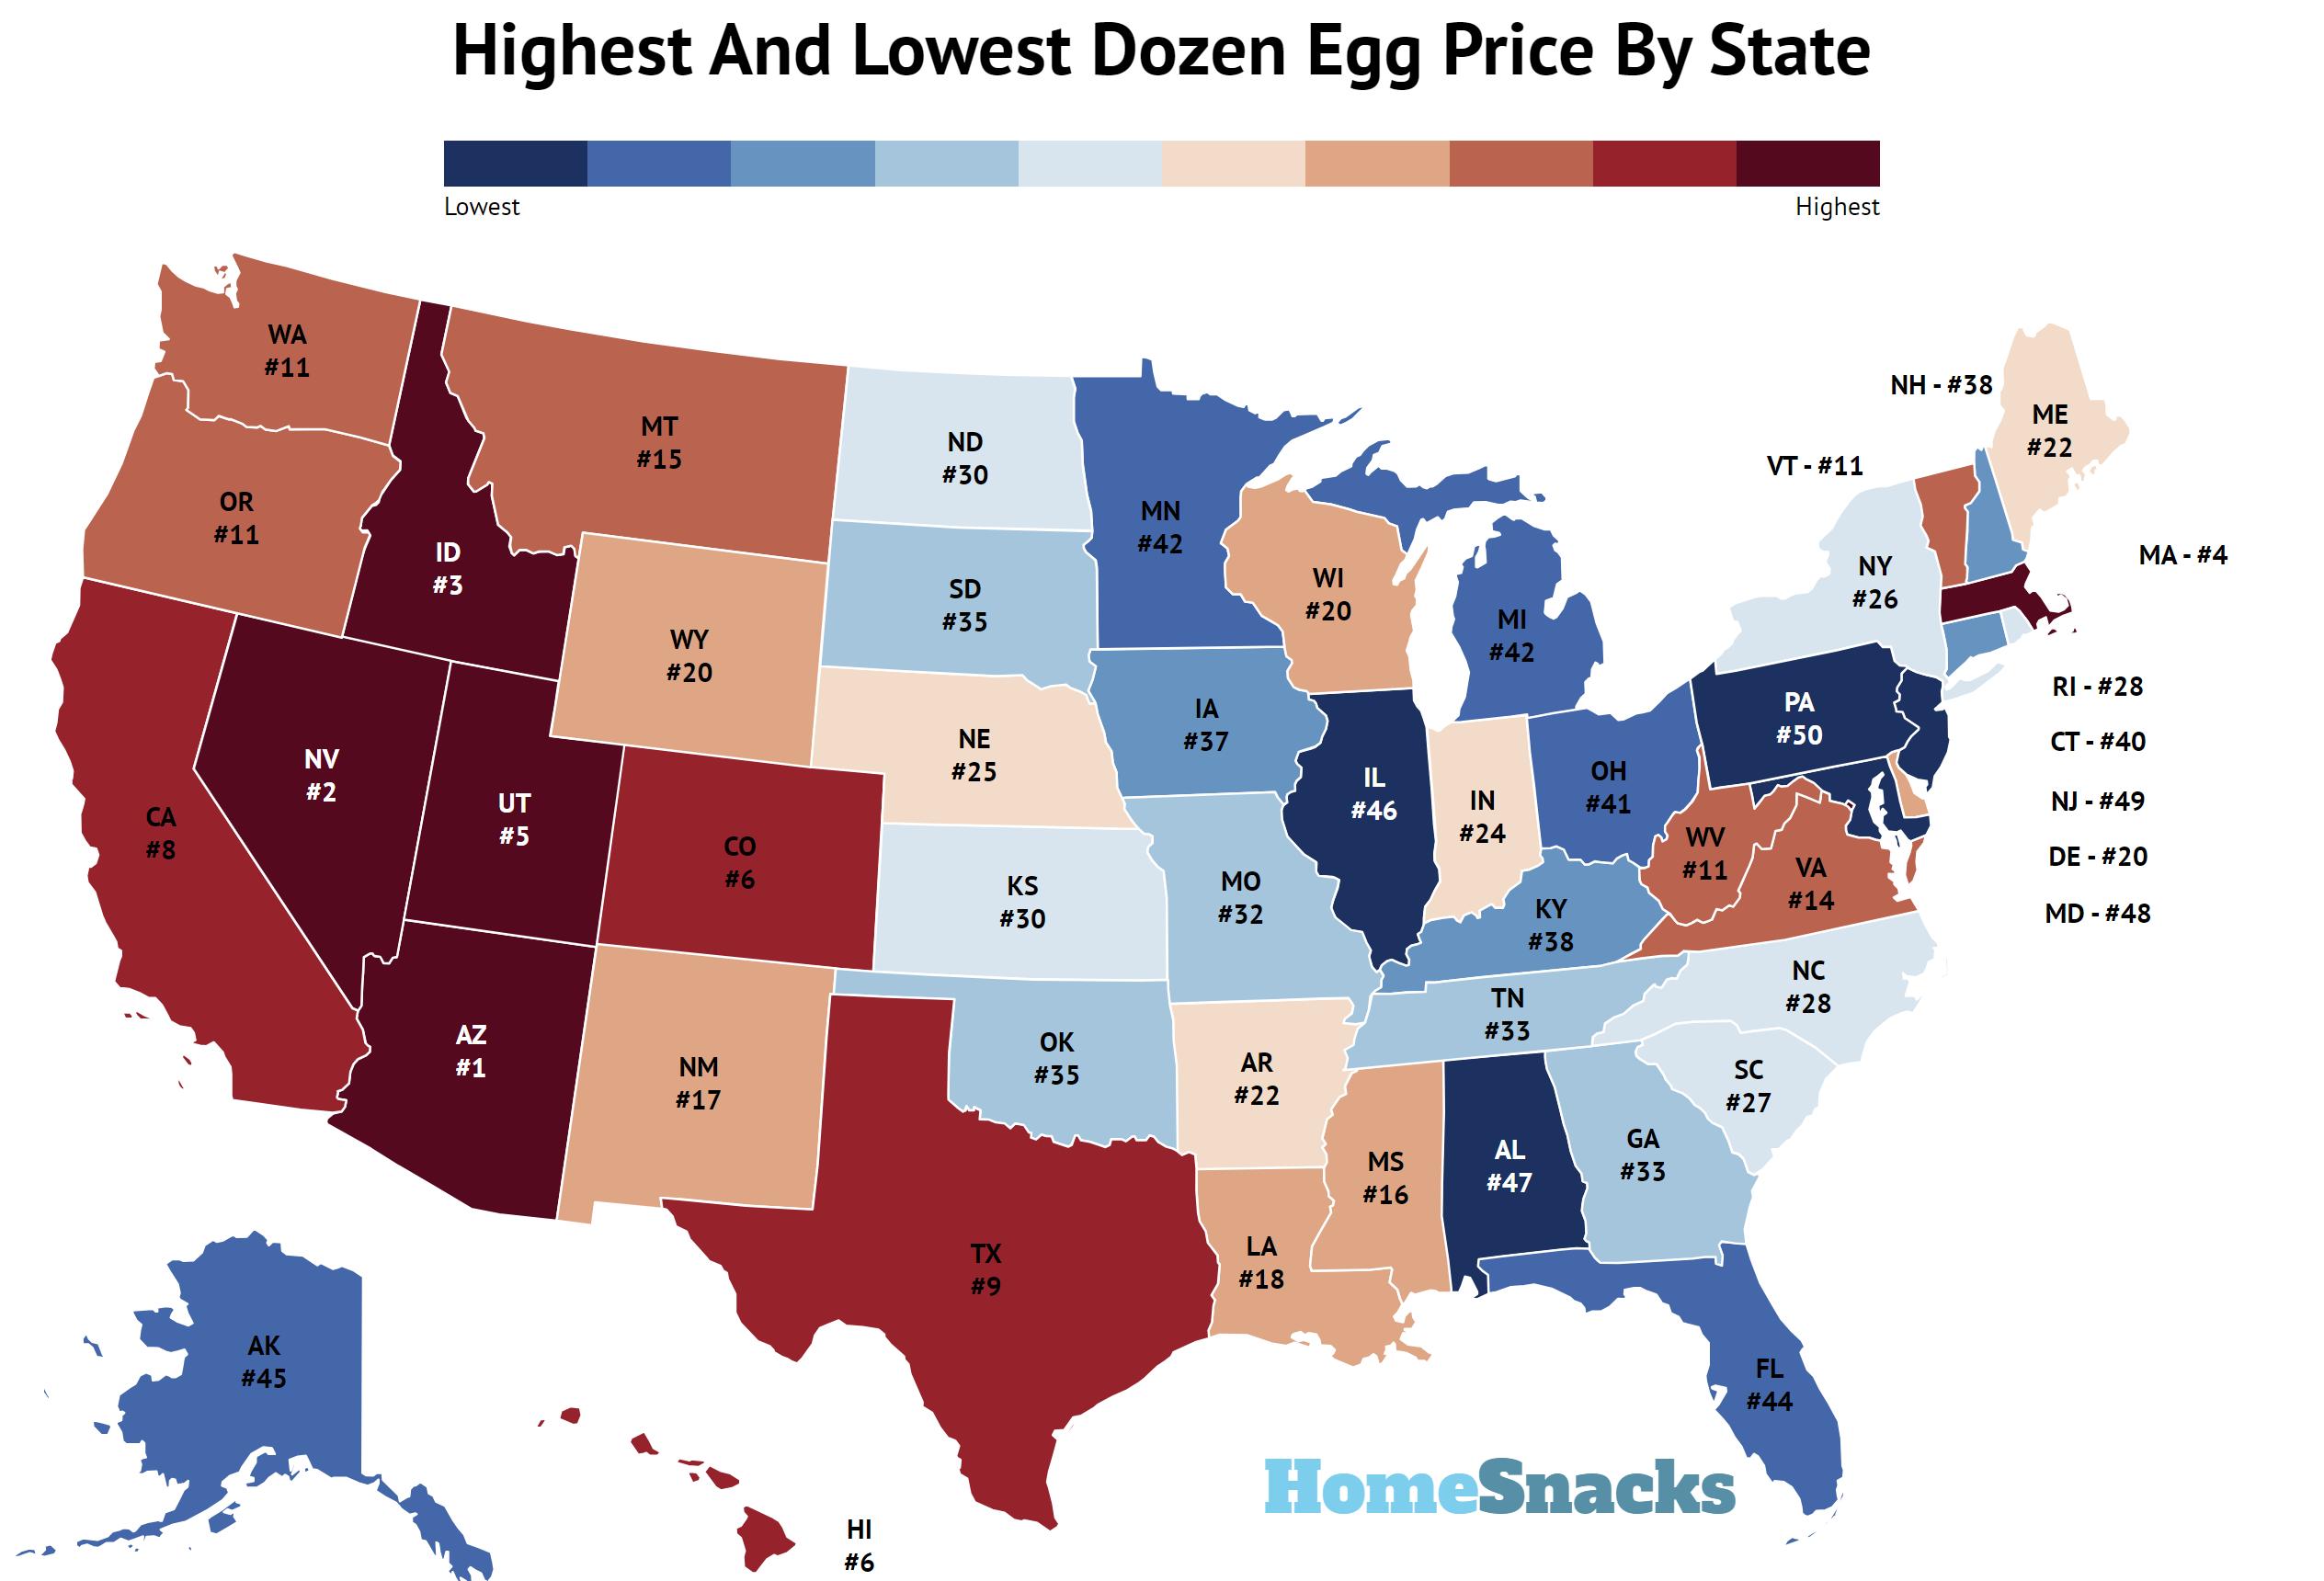 Highest And Lowest Average Dozen Egg Price By State